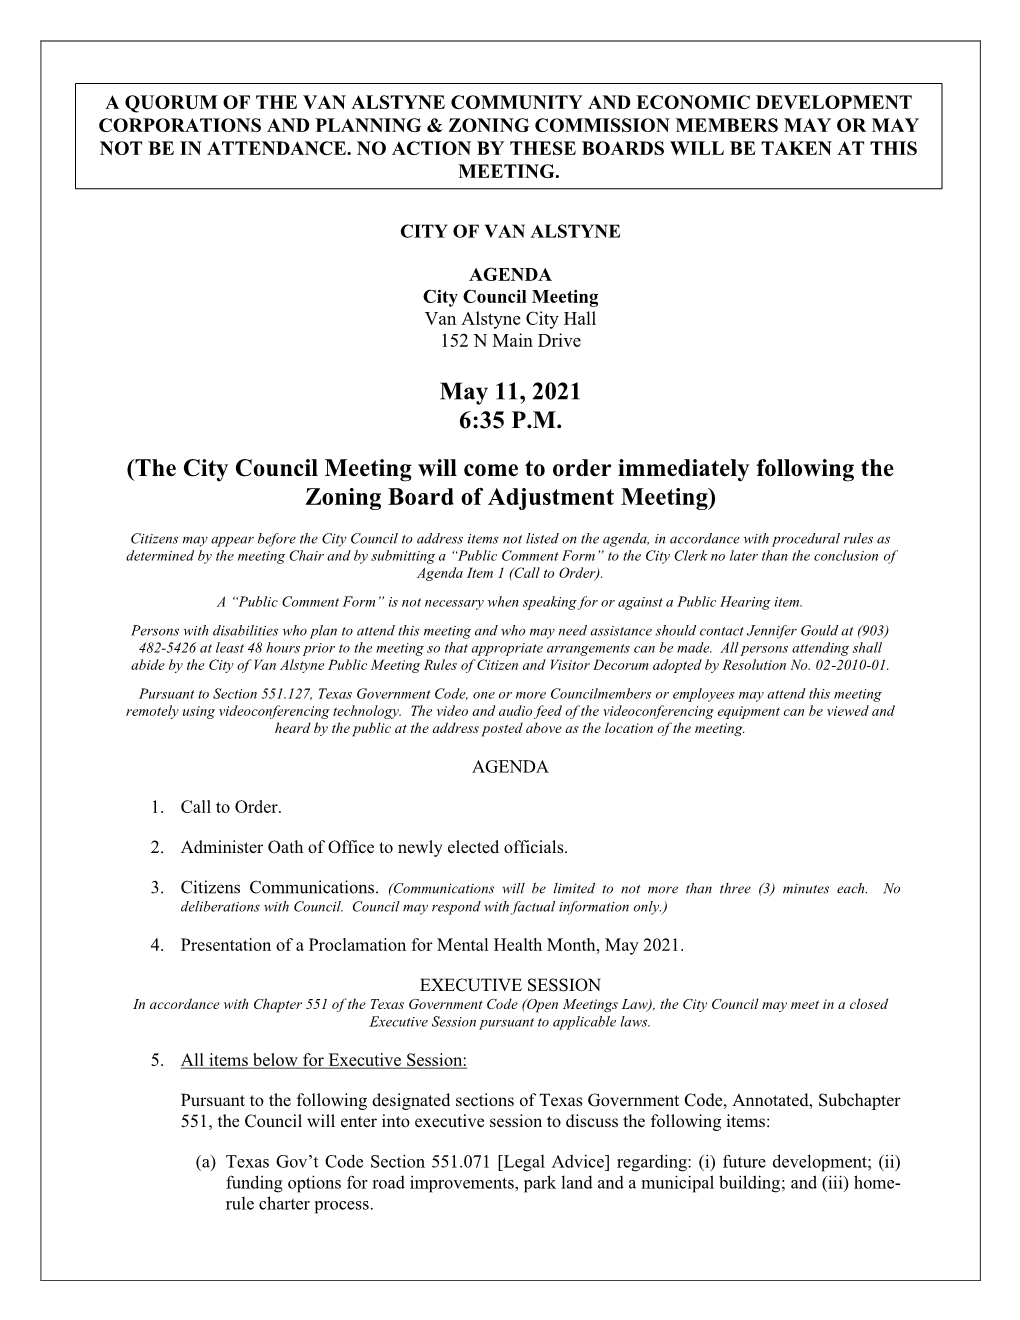 May 11, 2021 6:35 P.M. (The City Council Meeting Will Come to Order Immediately Following the Zoning Board of Adjustment Meeting